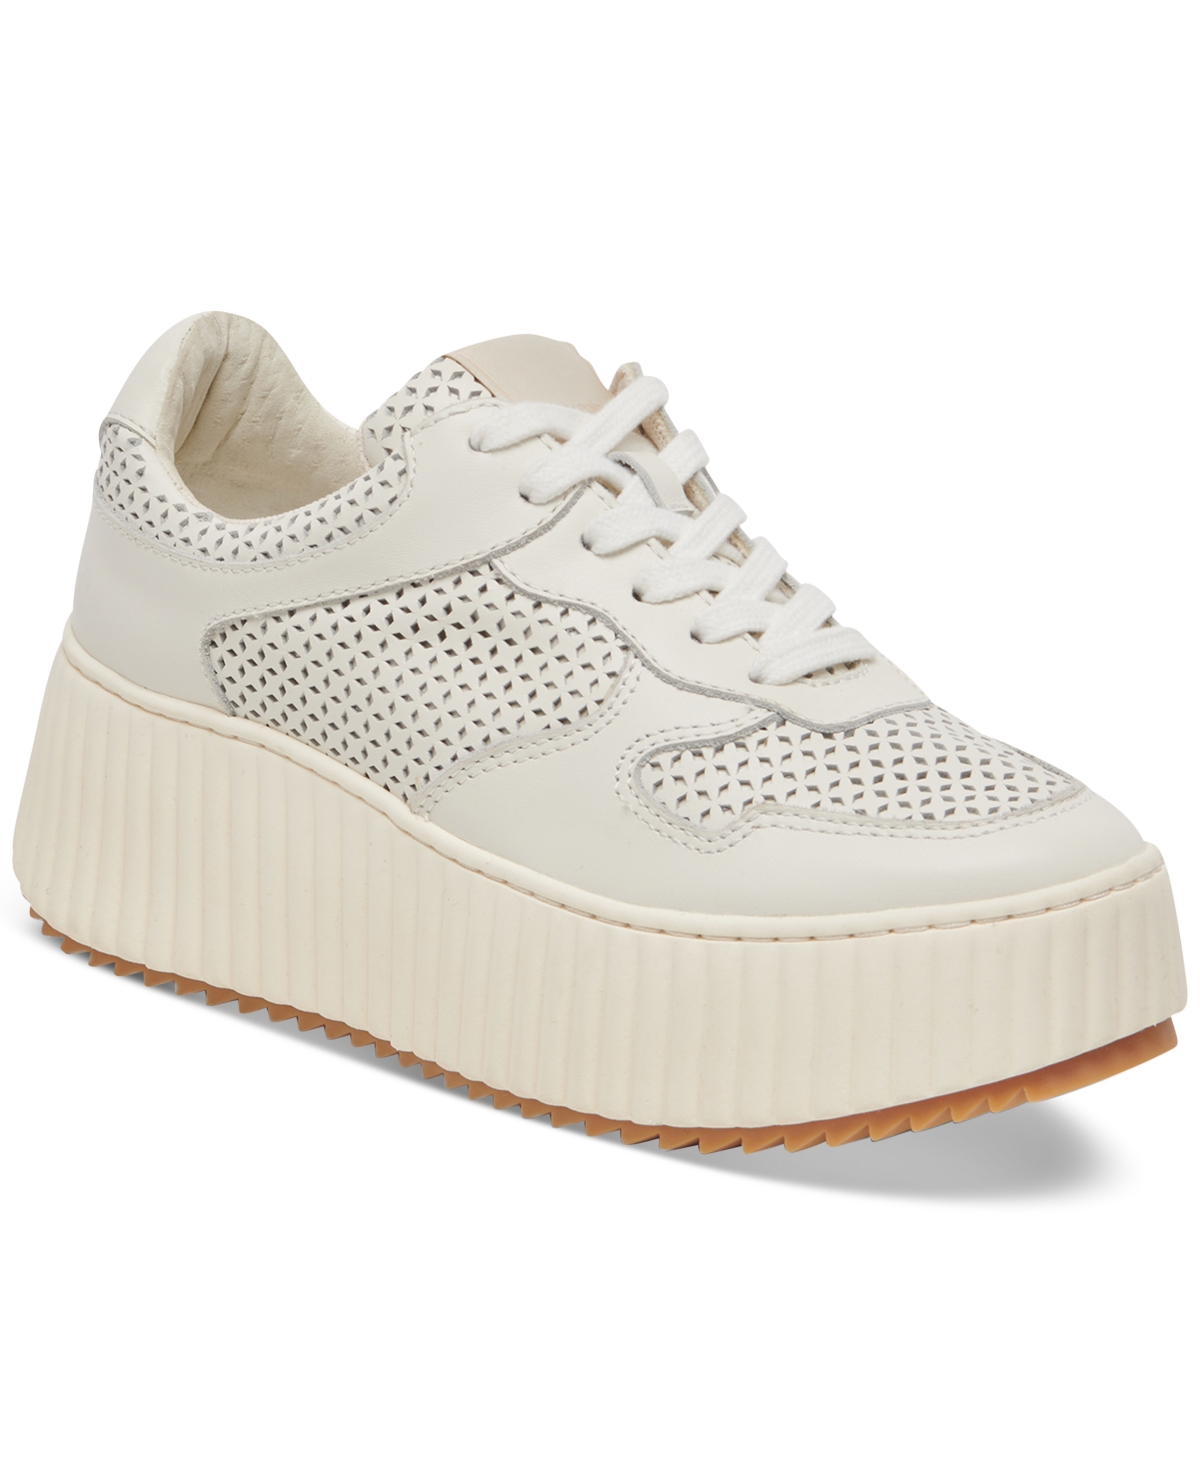 Daisha Lace-Up Platform Sneakers - White Perforated